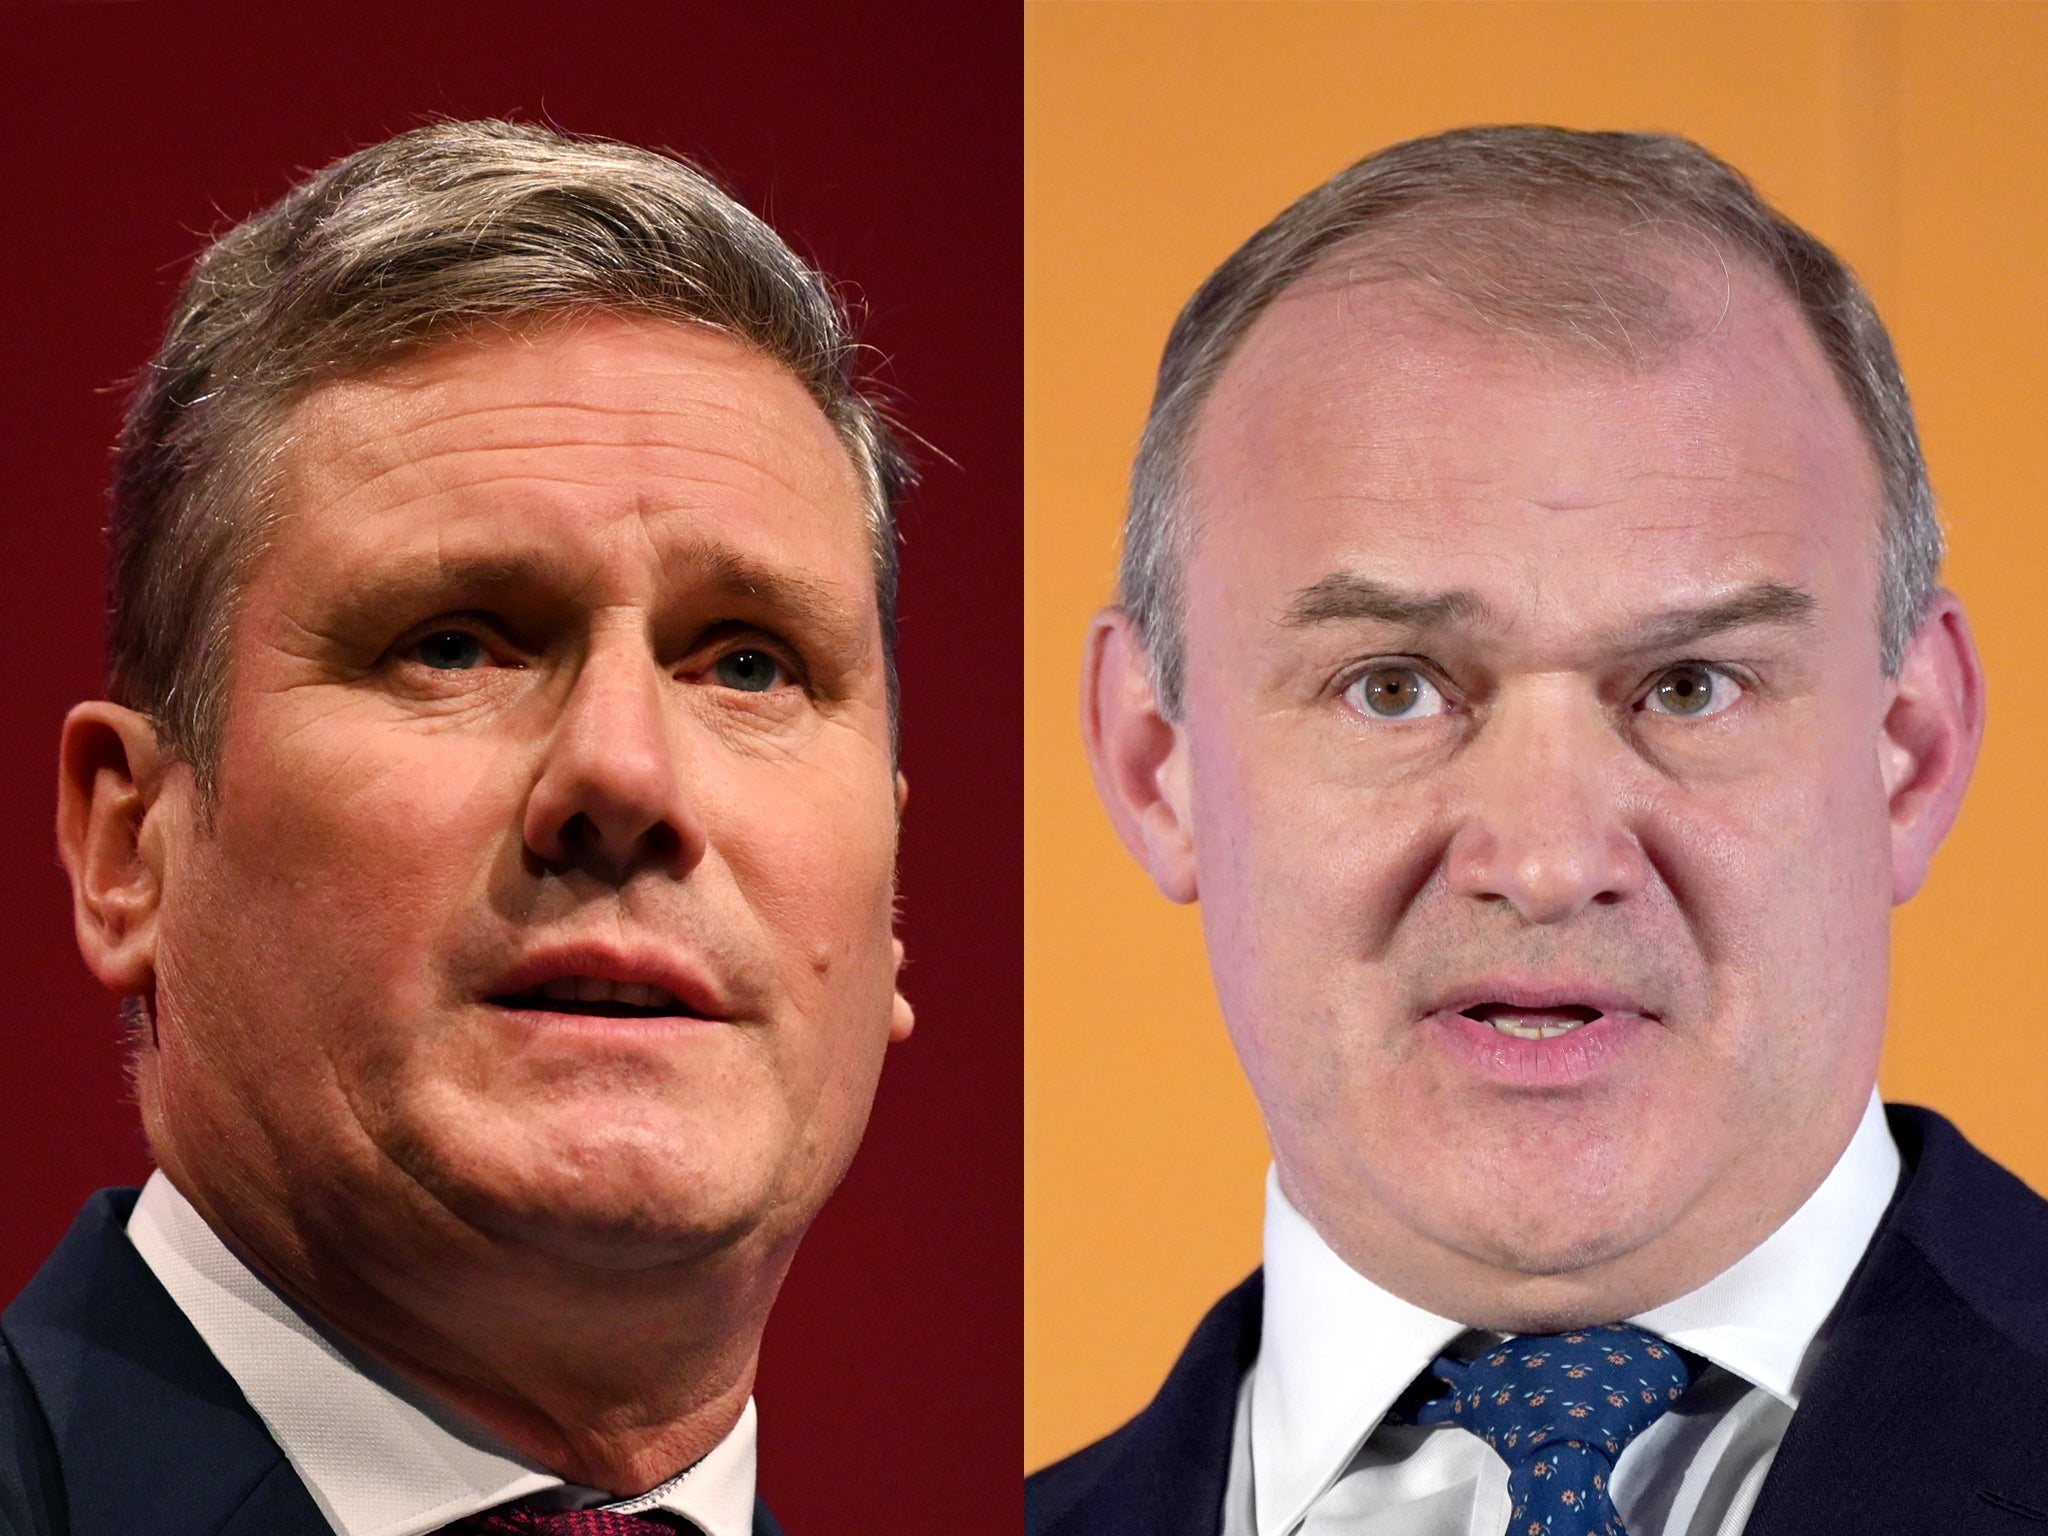 It seems unlikely that there will be any formal pact between Labour and the Lib Dems